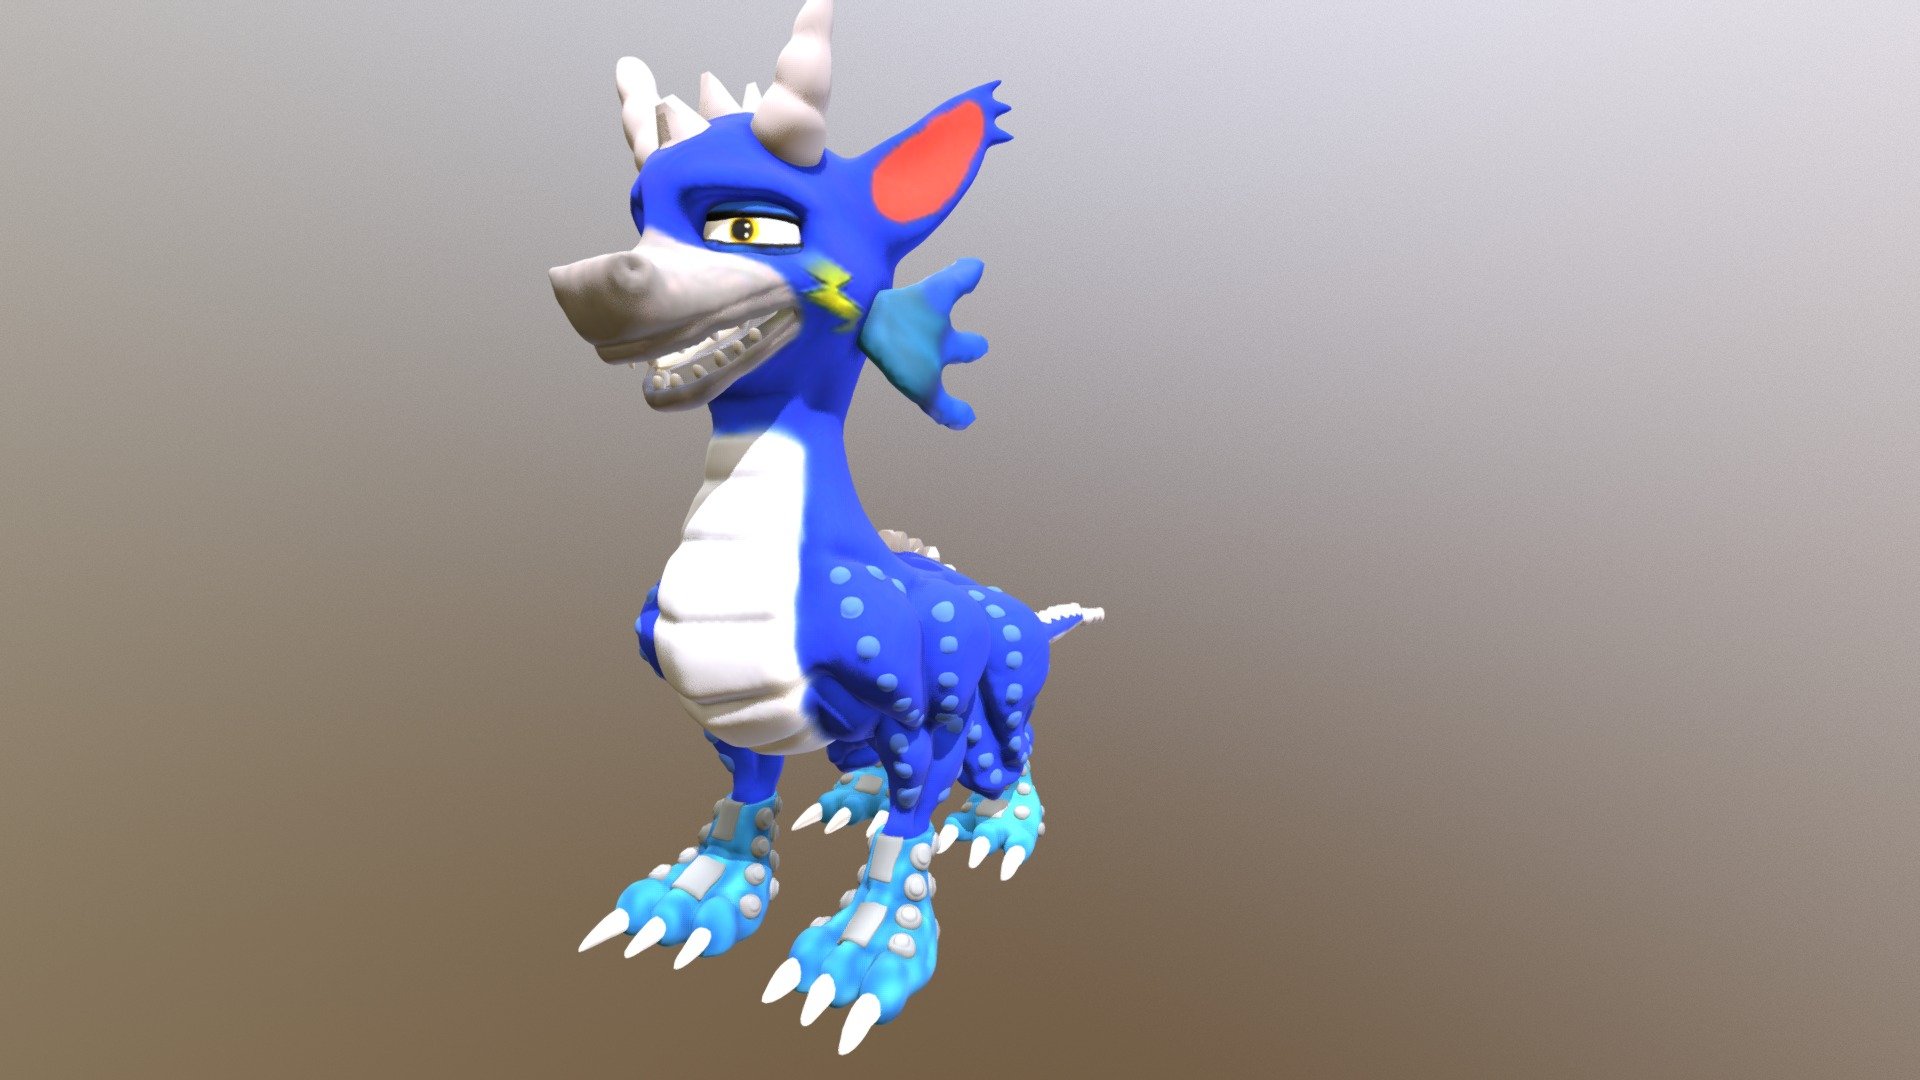 Xenia The Dragon Cyborg Dragons working in progress This is Model 3d for View Live - Xenia Dragon Working in progress - 3D model by xeratdragons (@dragonights91) 3d model